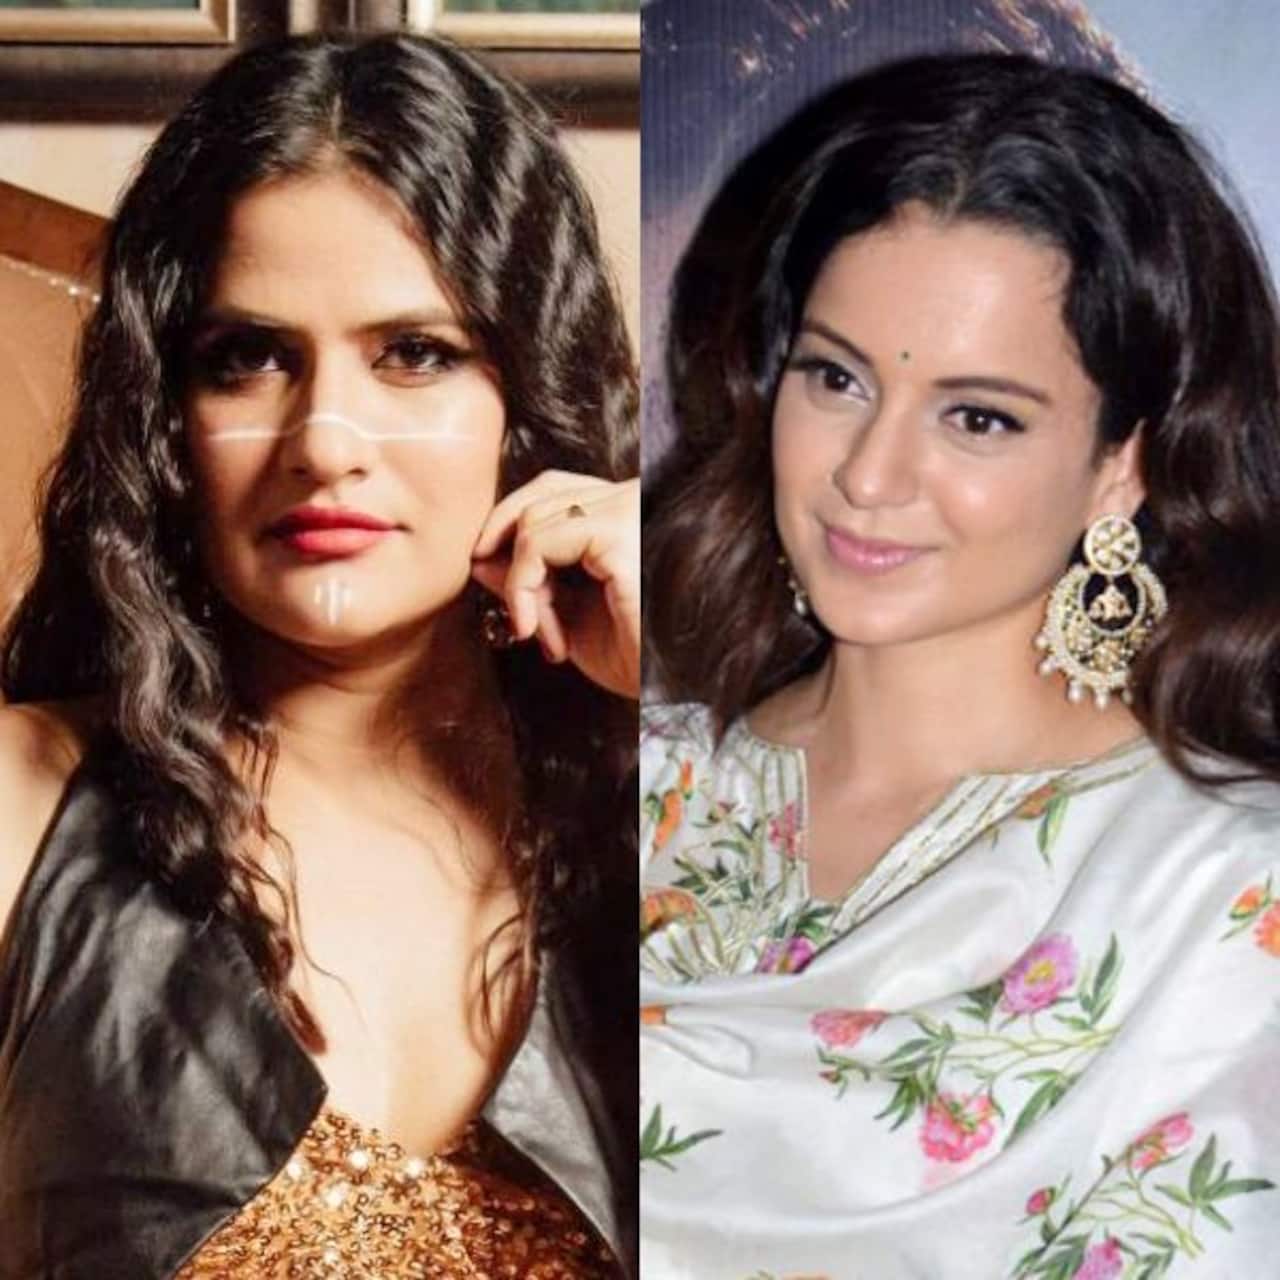 Sona Mohapatra Calls Out Kangana Ranaut For Her Small Time Druggie Remark For Rhea Chakraborty